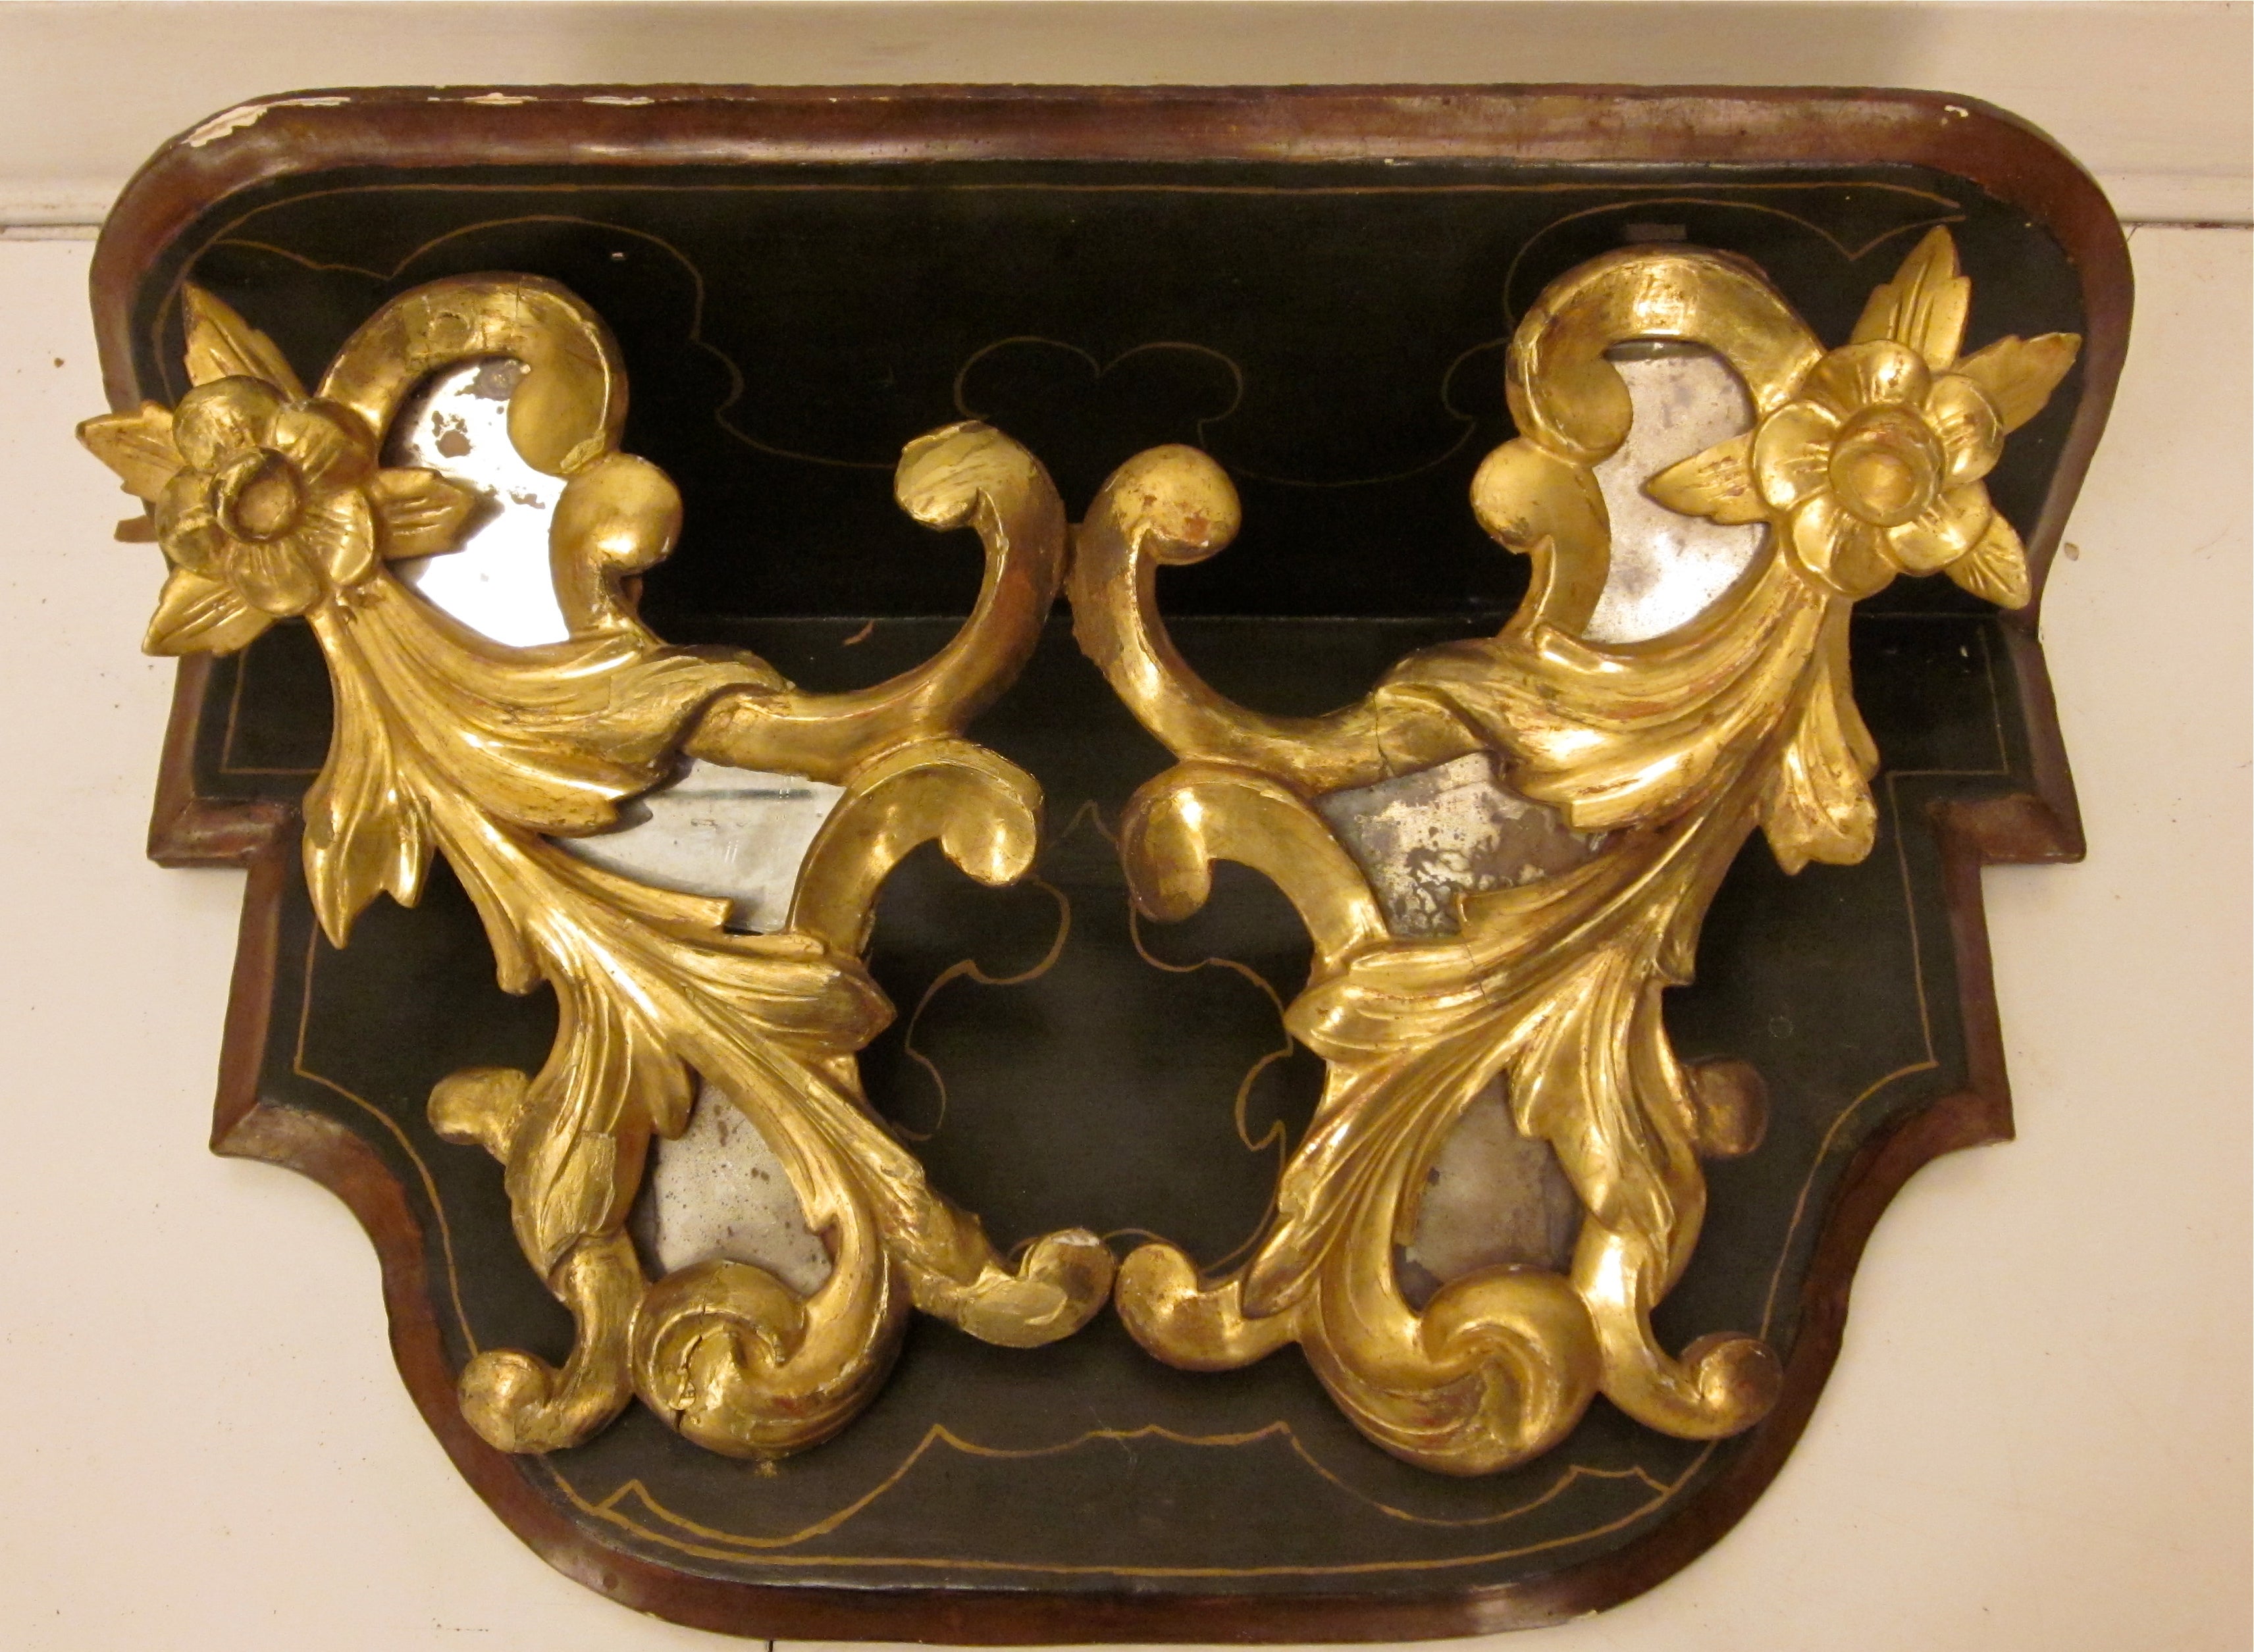 Pair of Italian Partial Gilt and Painted Sconces